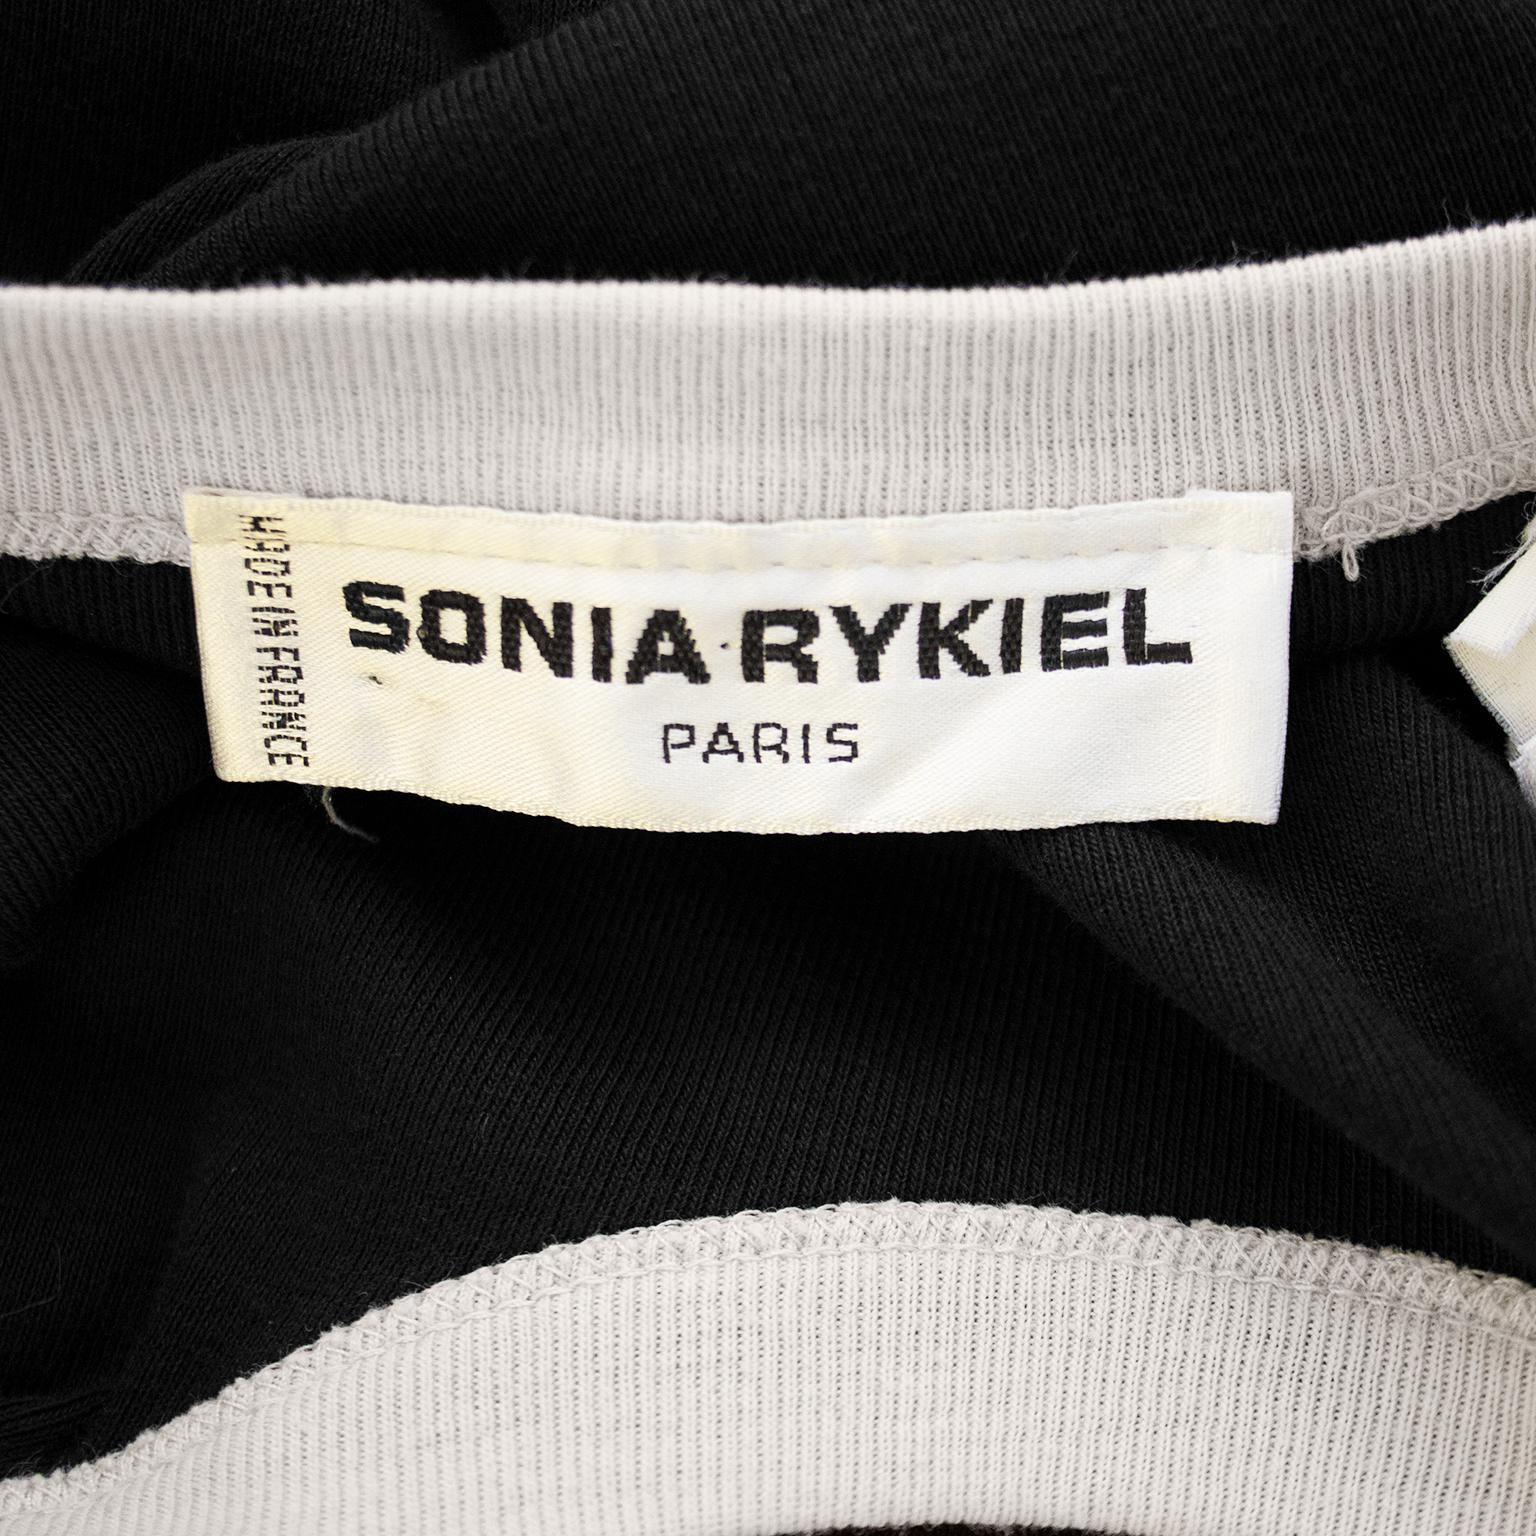 1980s Sonia Rykiel Black Cotton Jersey Dress with White Trim  In Good Condition For Sale In Toronto, Ontario